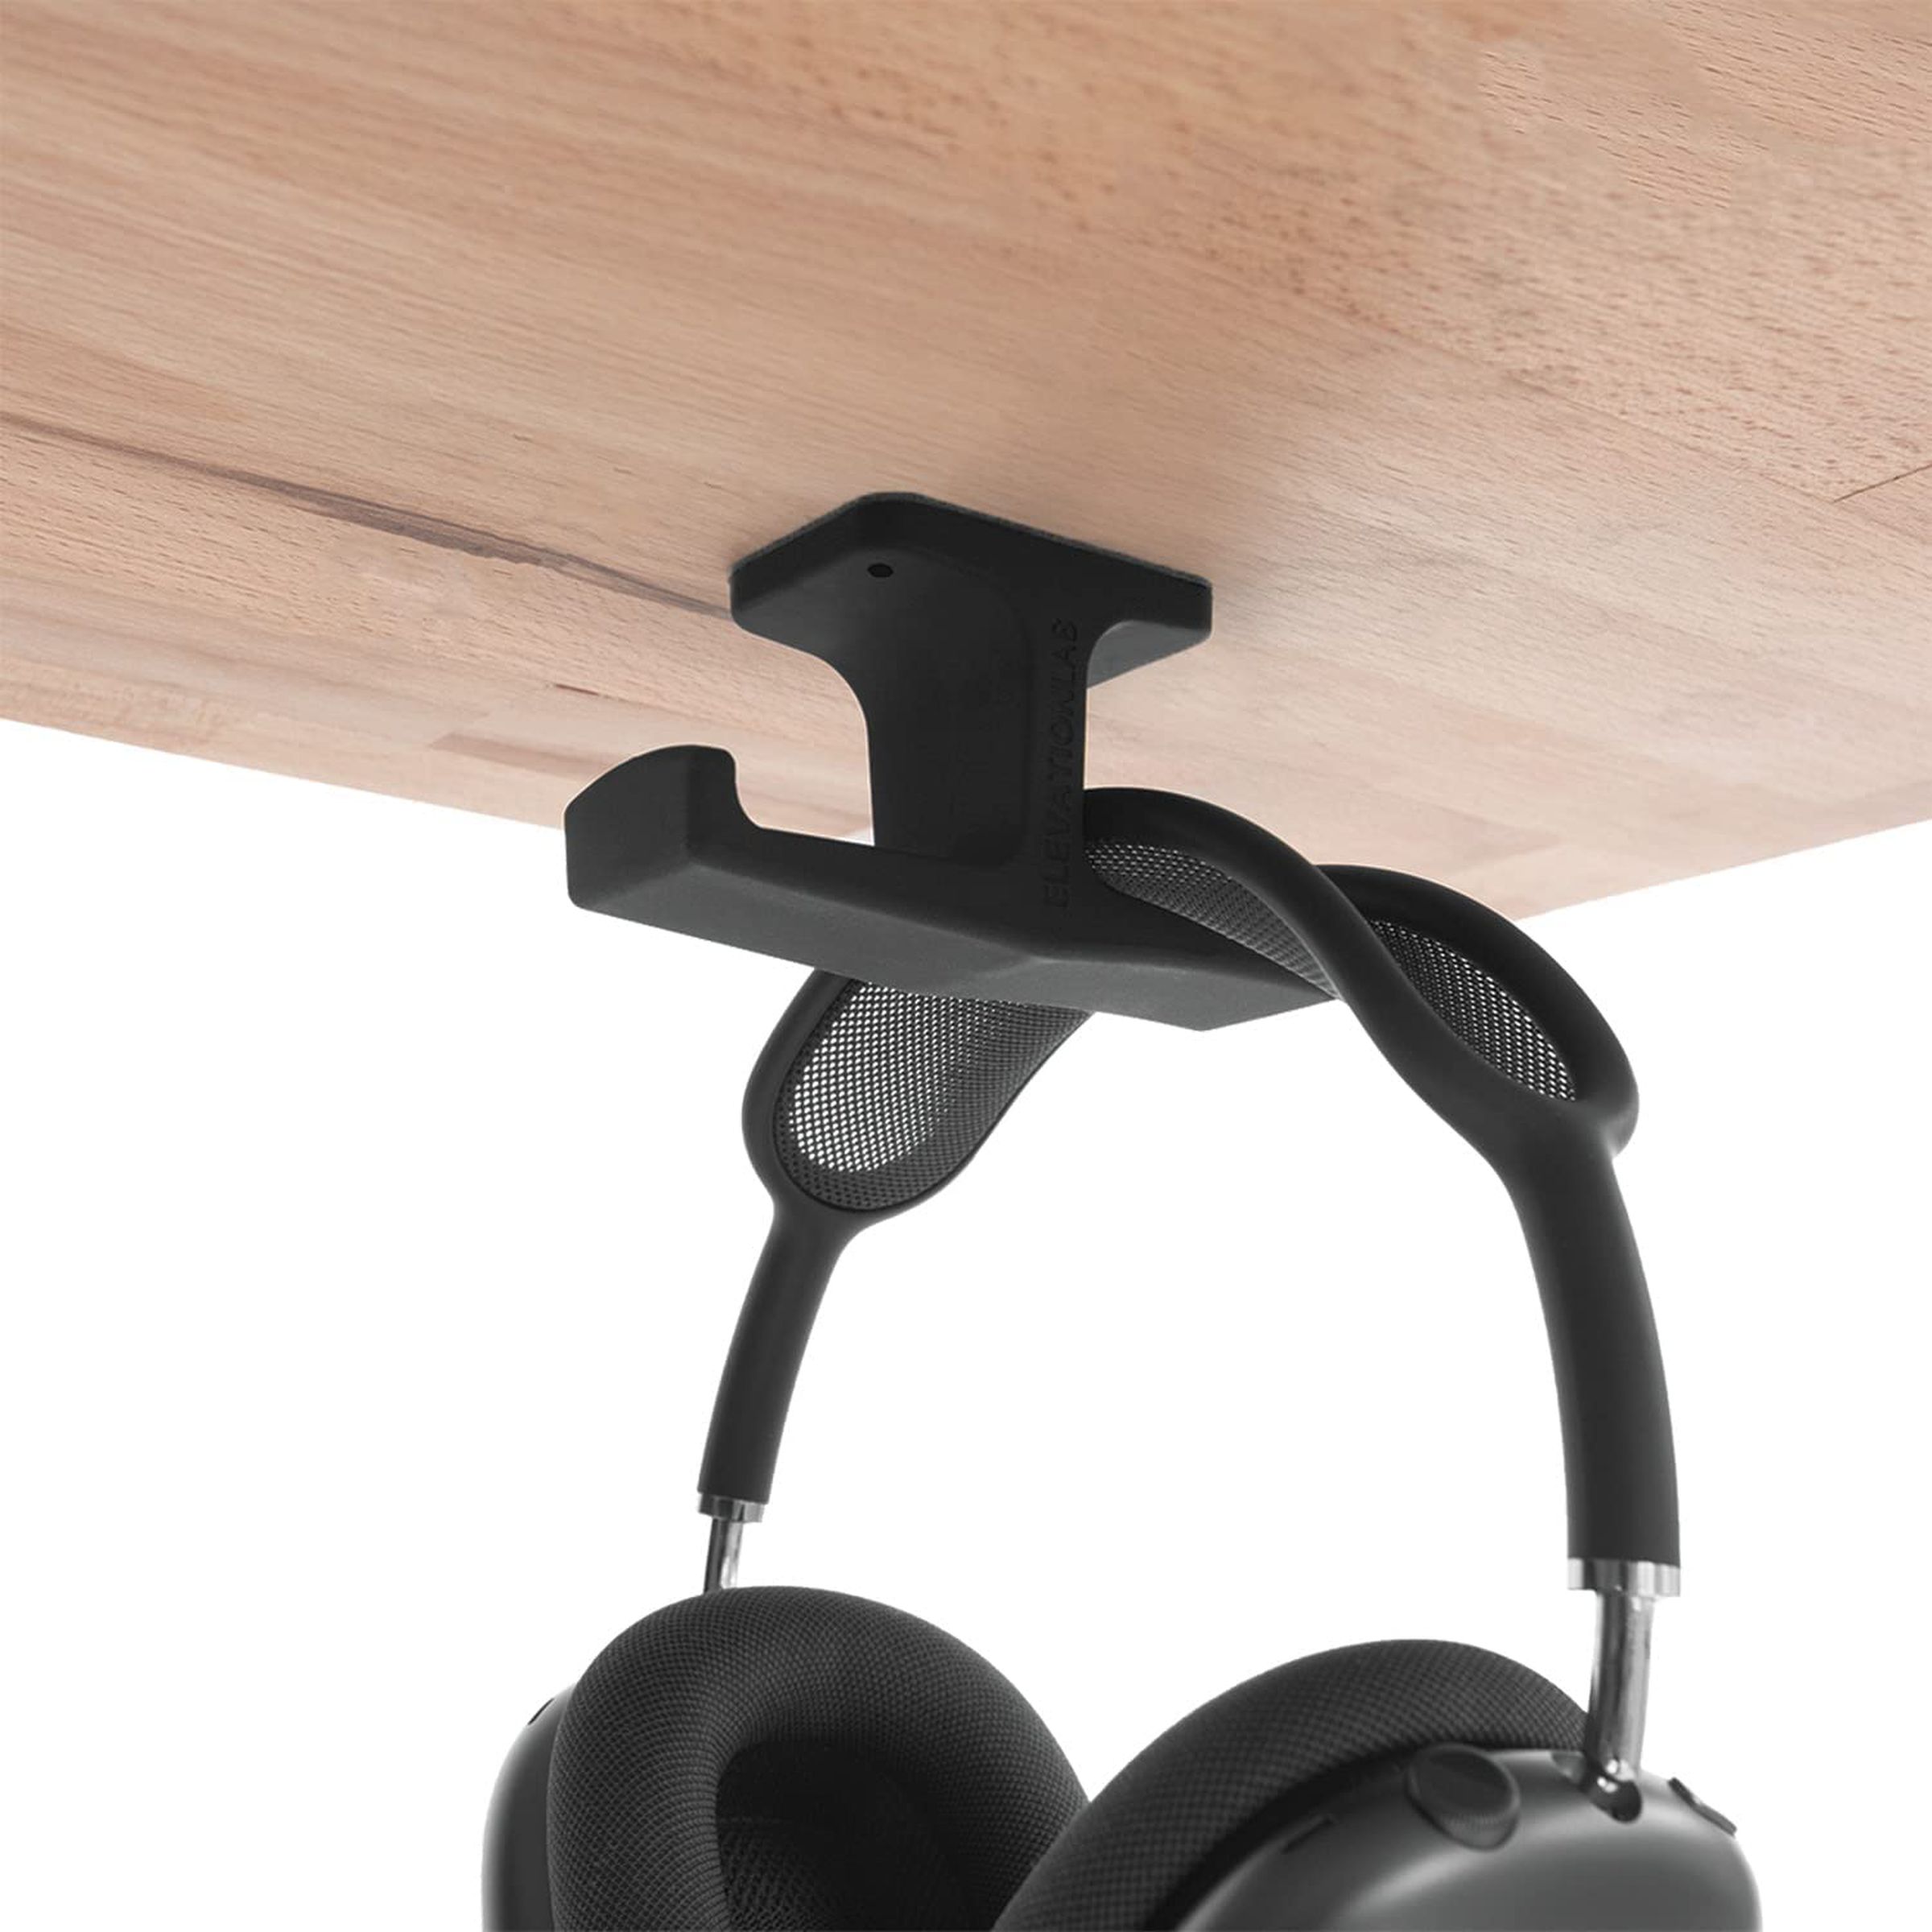 A double-hook fastened under a desk that holds a pair of headphones.